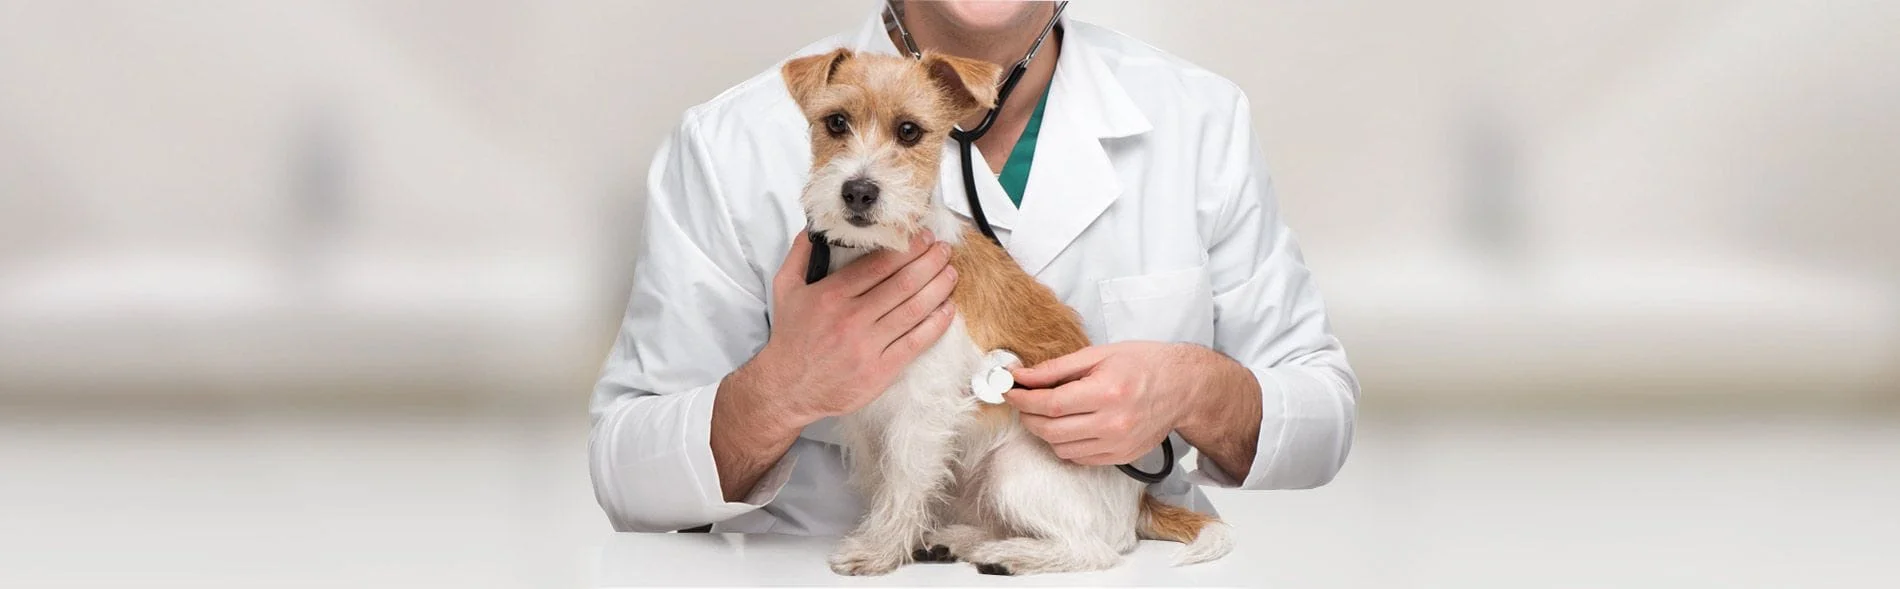 Oakdale Animal Hospital Offers State-of-the-Art Diagnostics